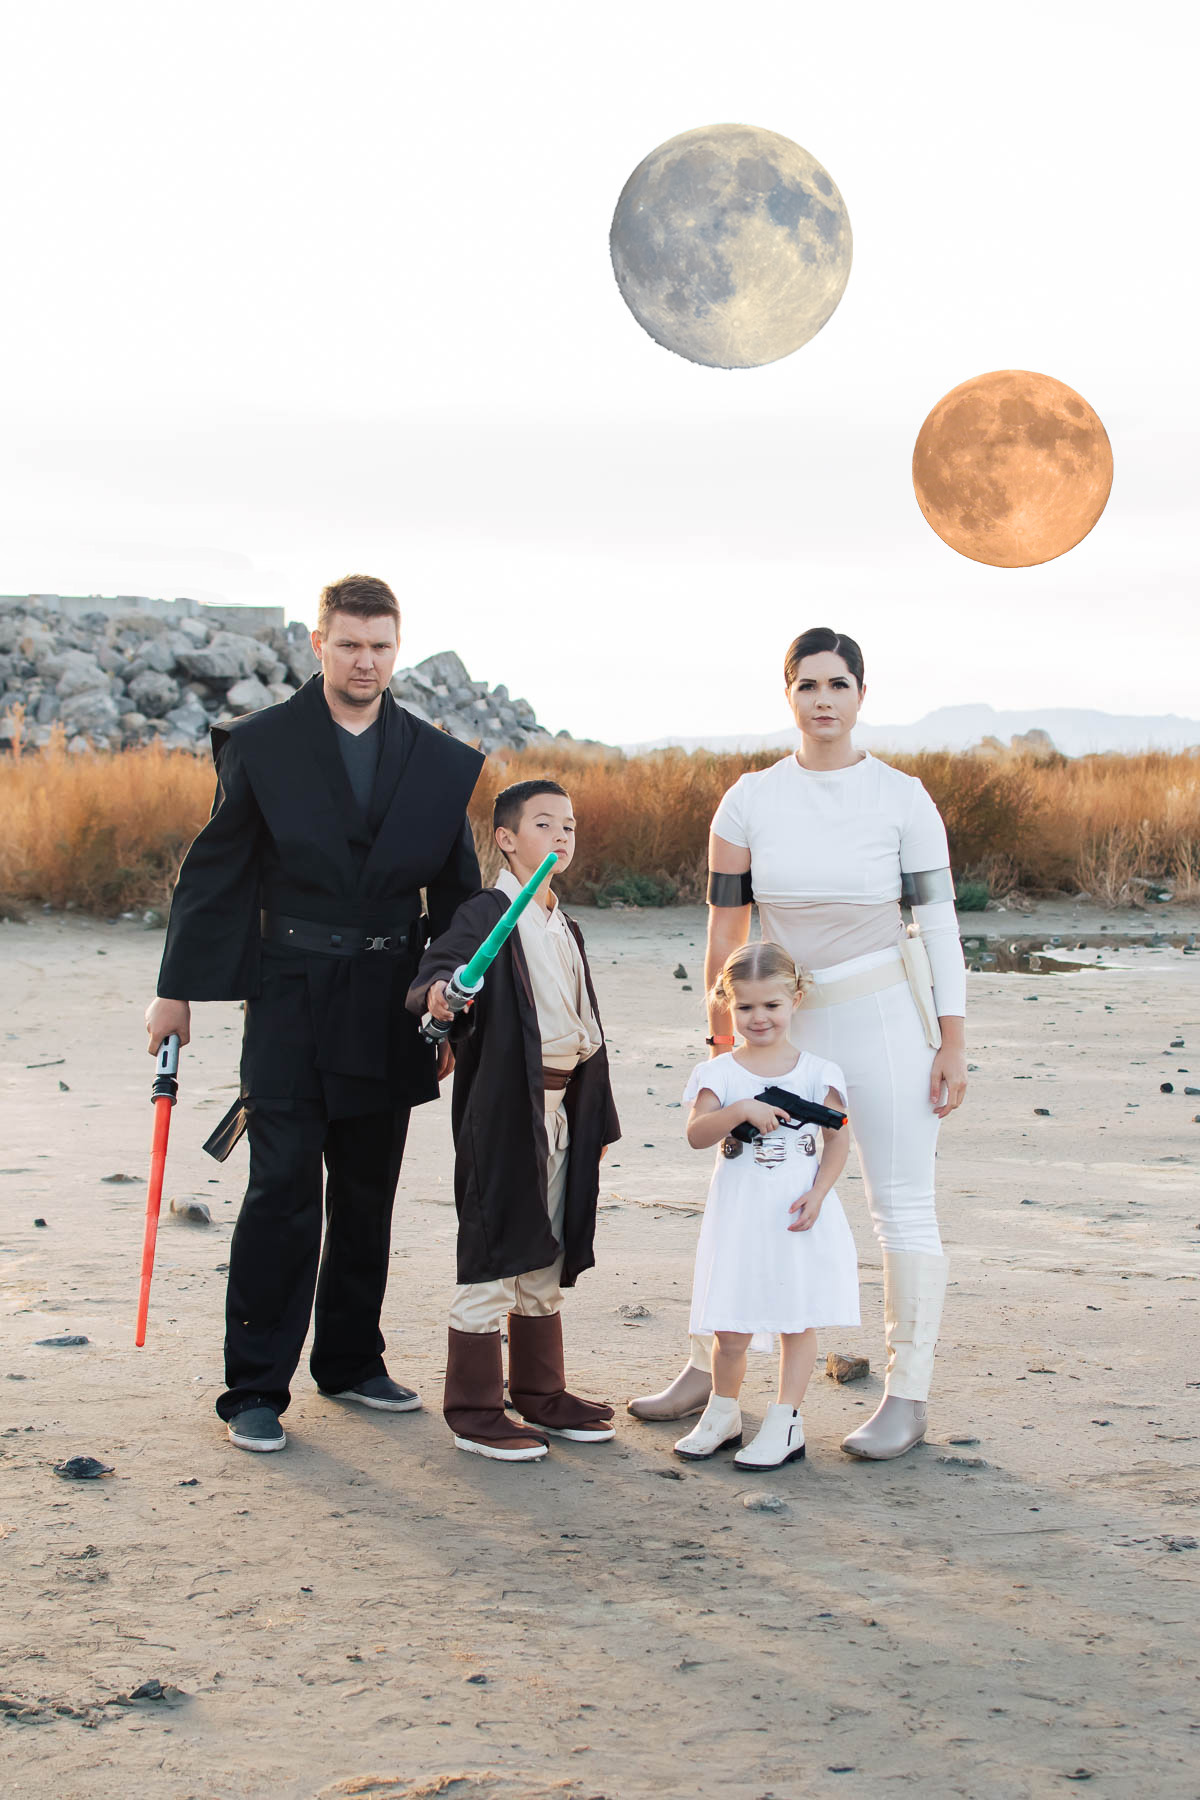 Family of 4 dressed as Star Wars characters poses on sandy beach with fake moons in the background.